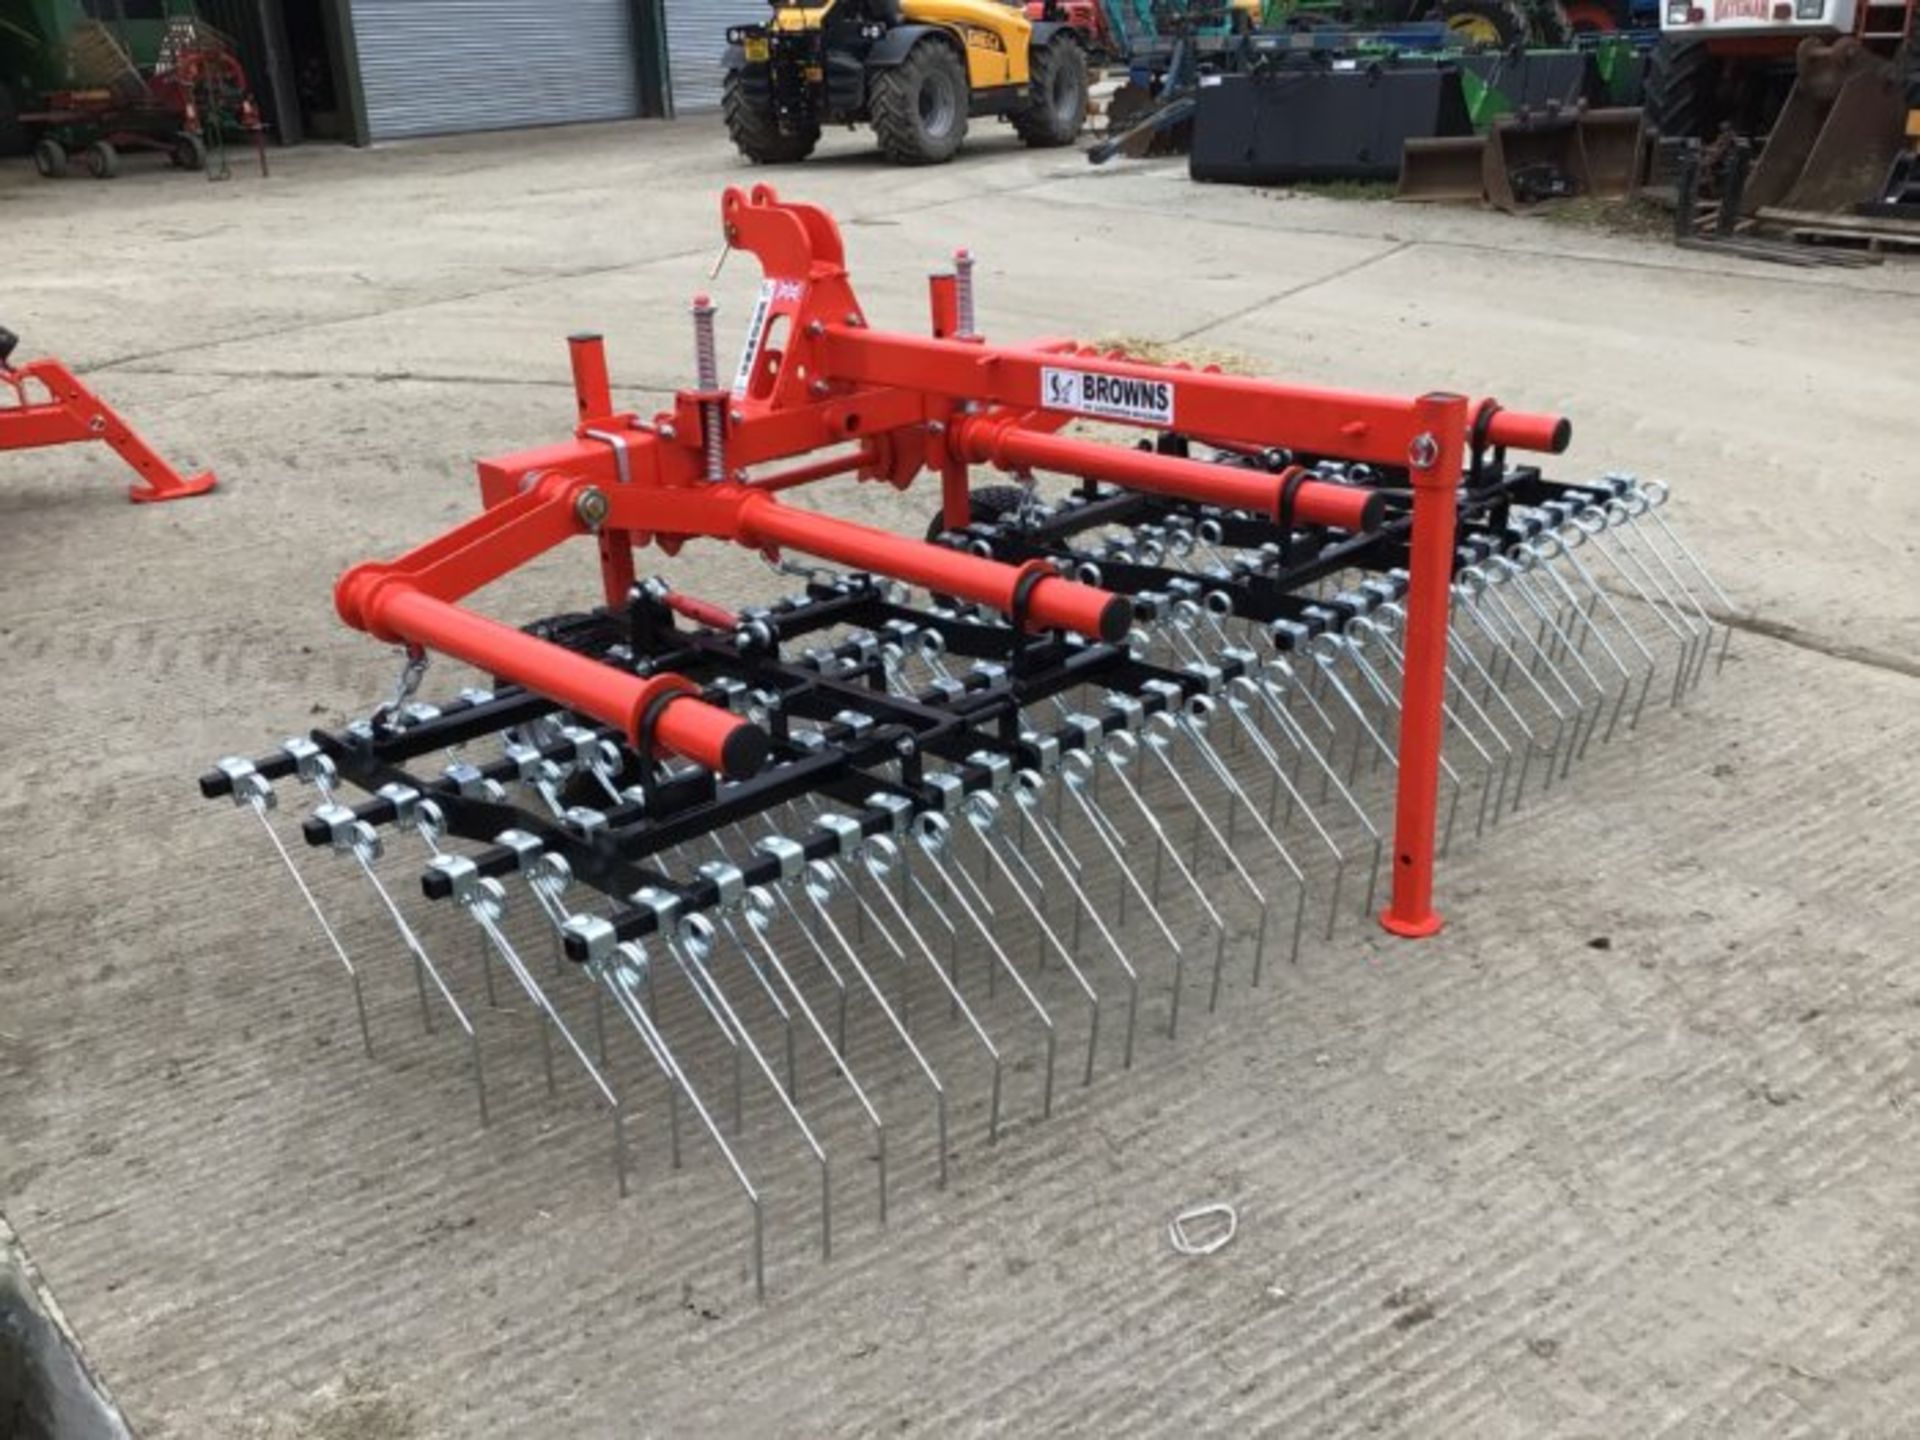 NEW BROWNS 3 METRE GRASS HARROW. 3 POINT LINKAGE - Image 4 of 8